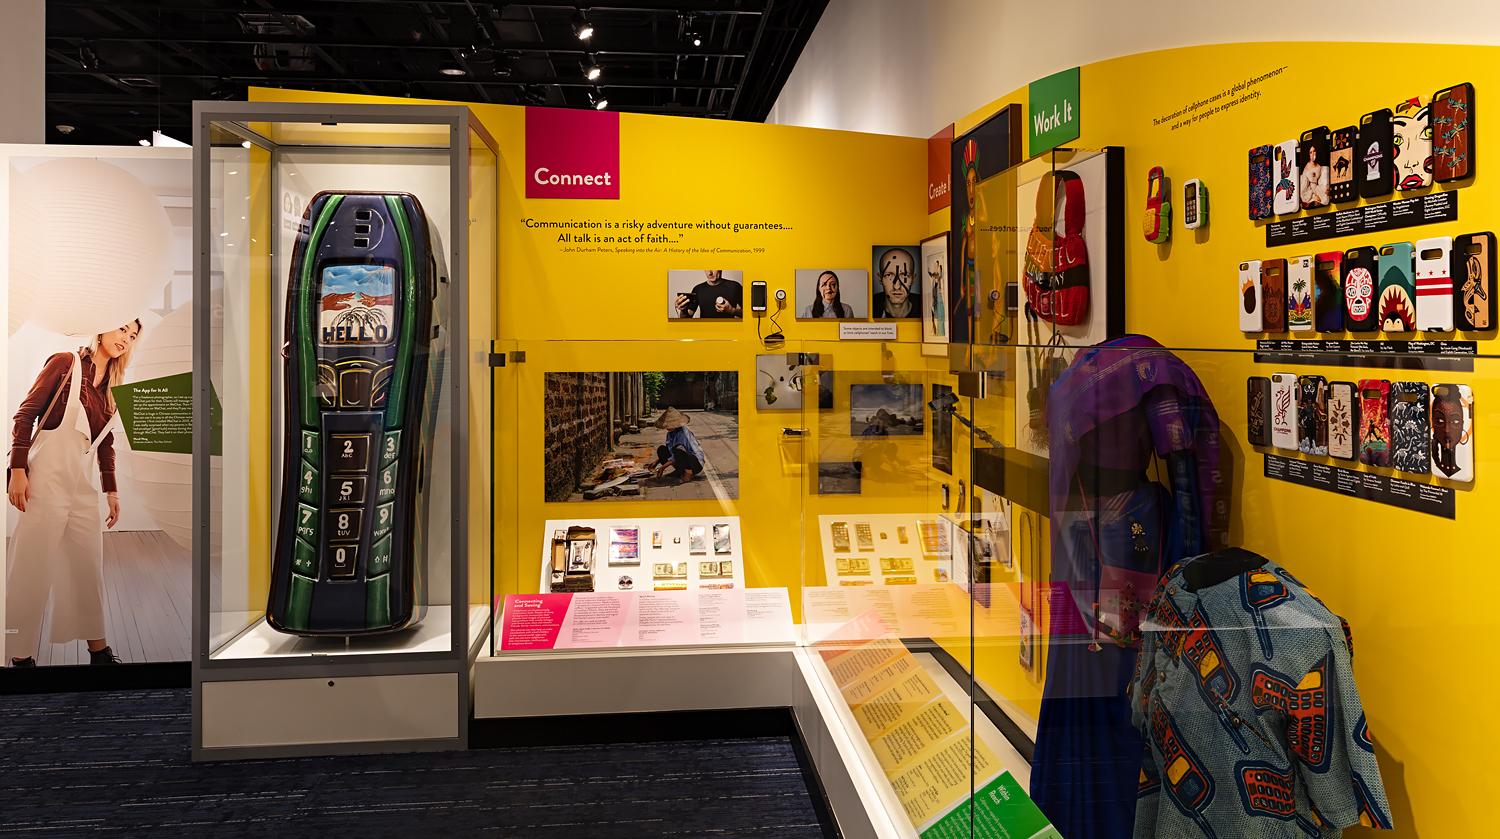 Exhibit showing an oversized cell phone